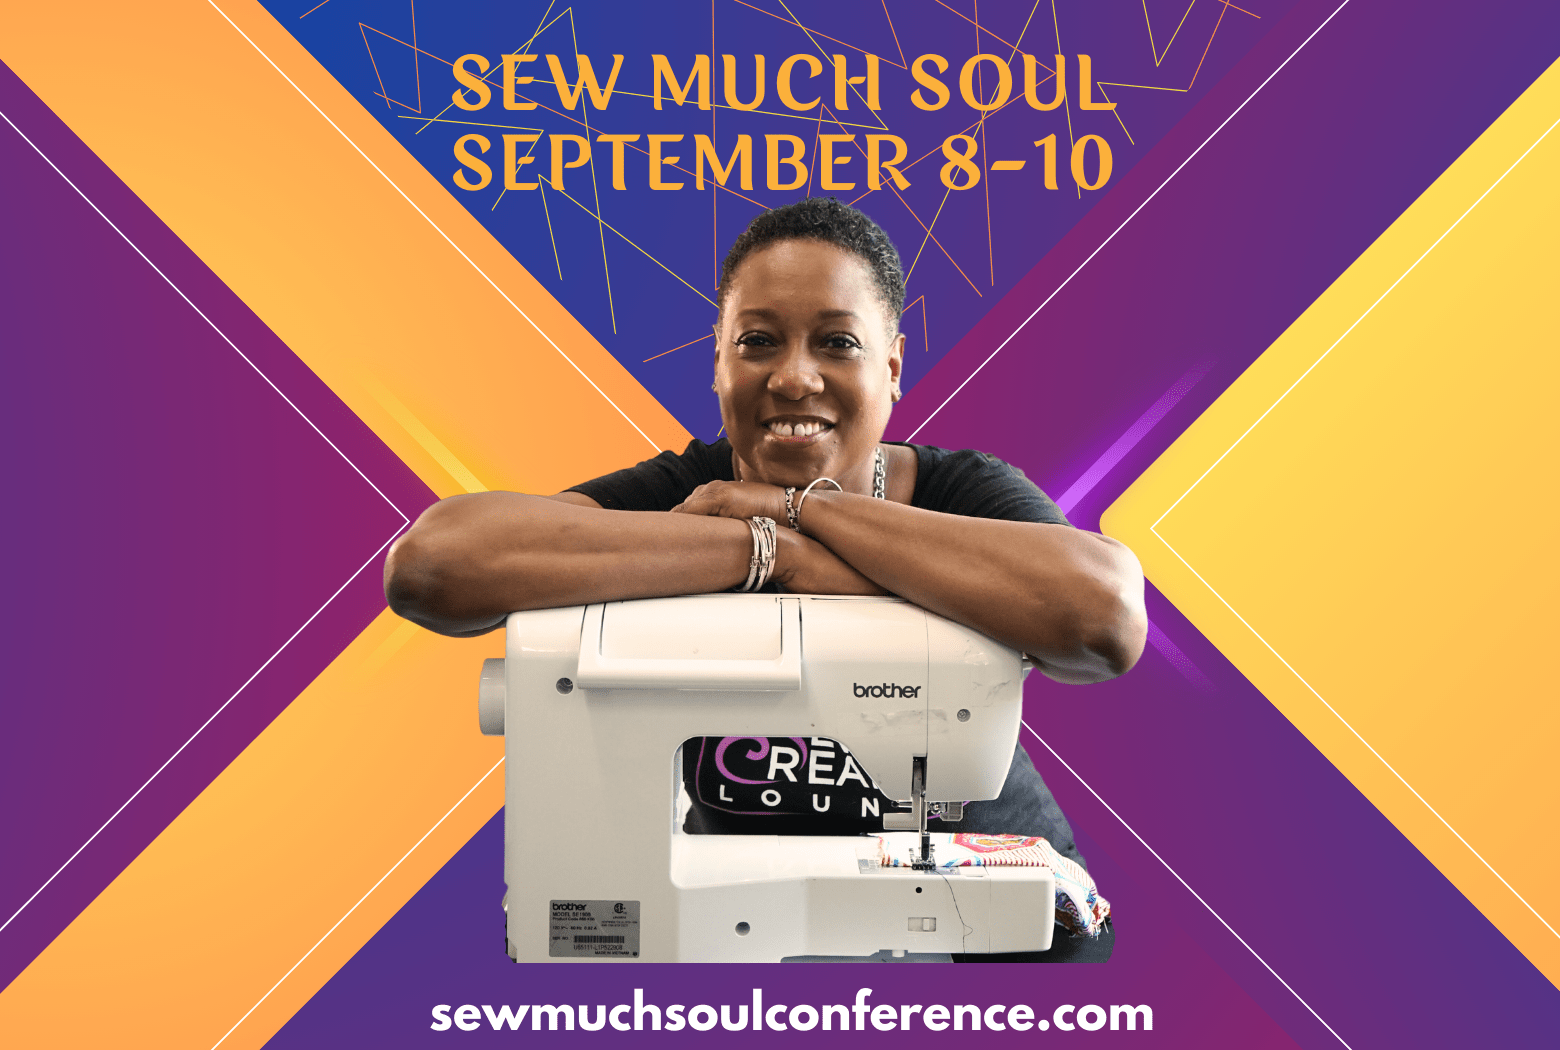 Sew Much Soul Conference